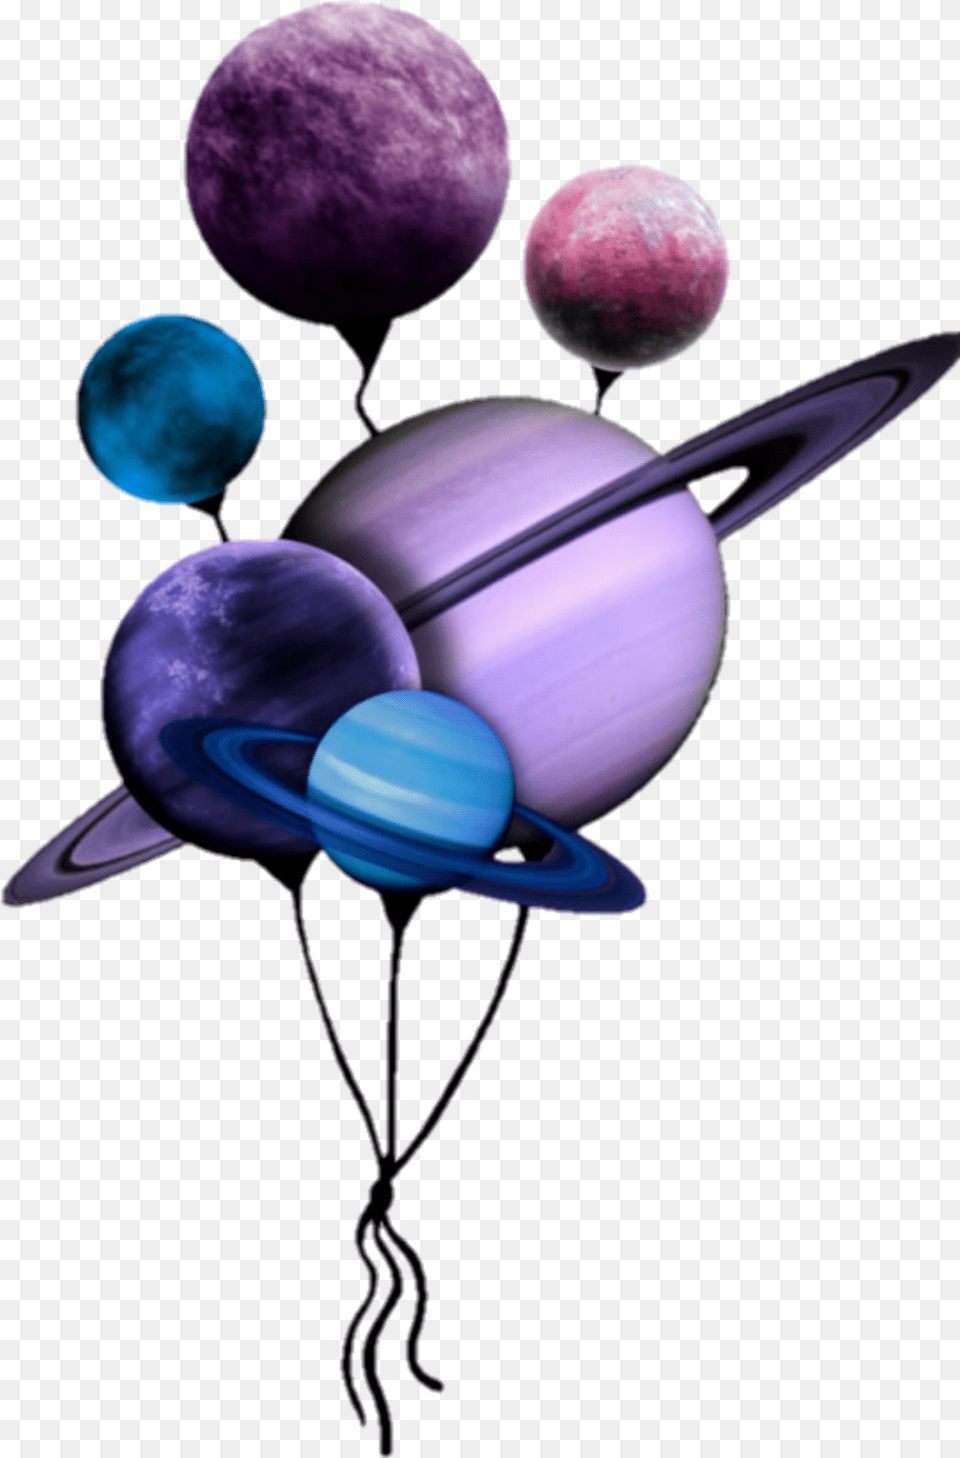 Baloes Planetas Planets Balloon Clipart, Astronomy, Outer Space, Planet, Moon Free Transparent Png